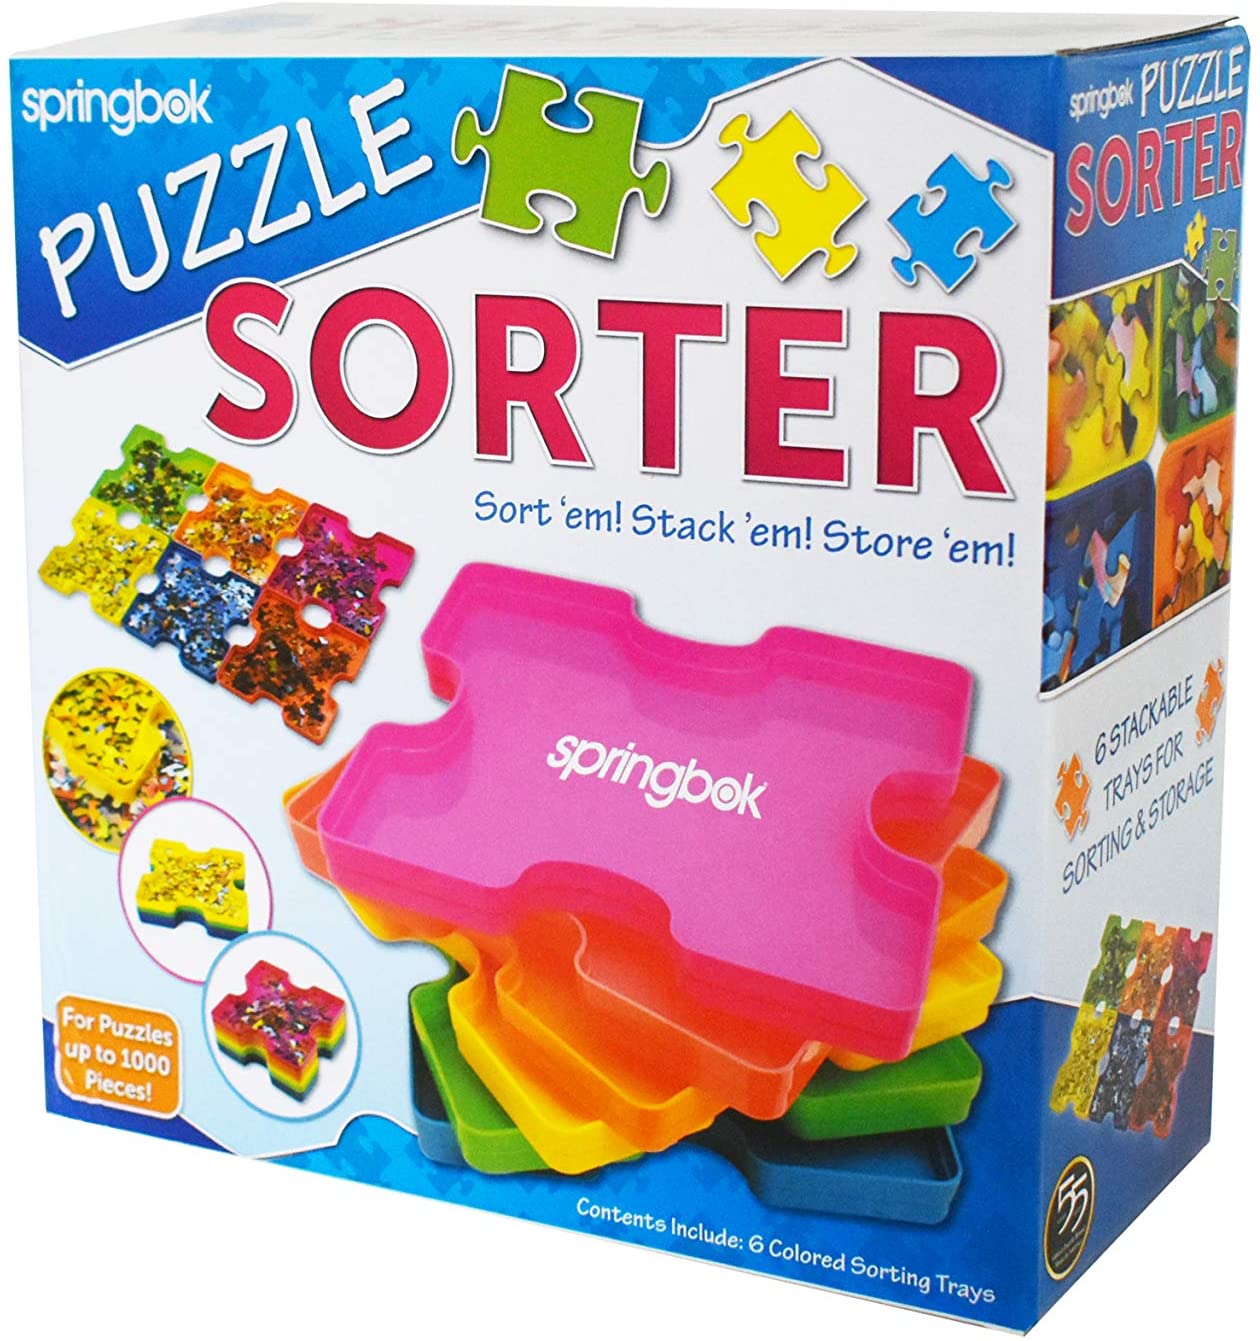 Puzzle Sorter - Puzzle Sorting Tray